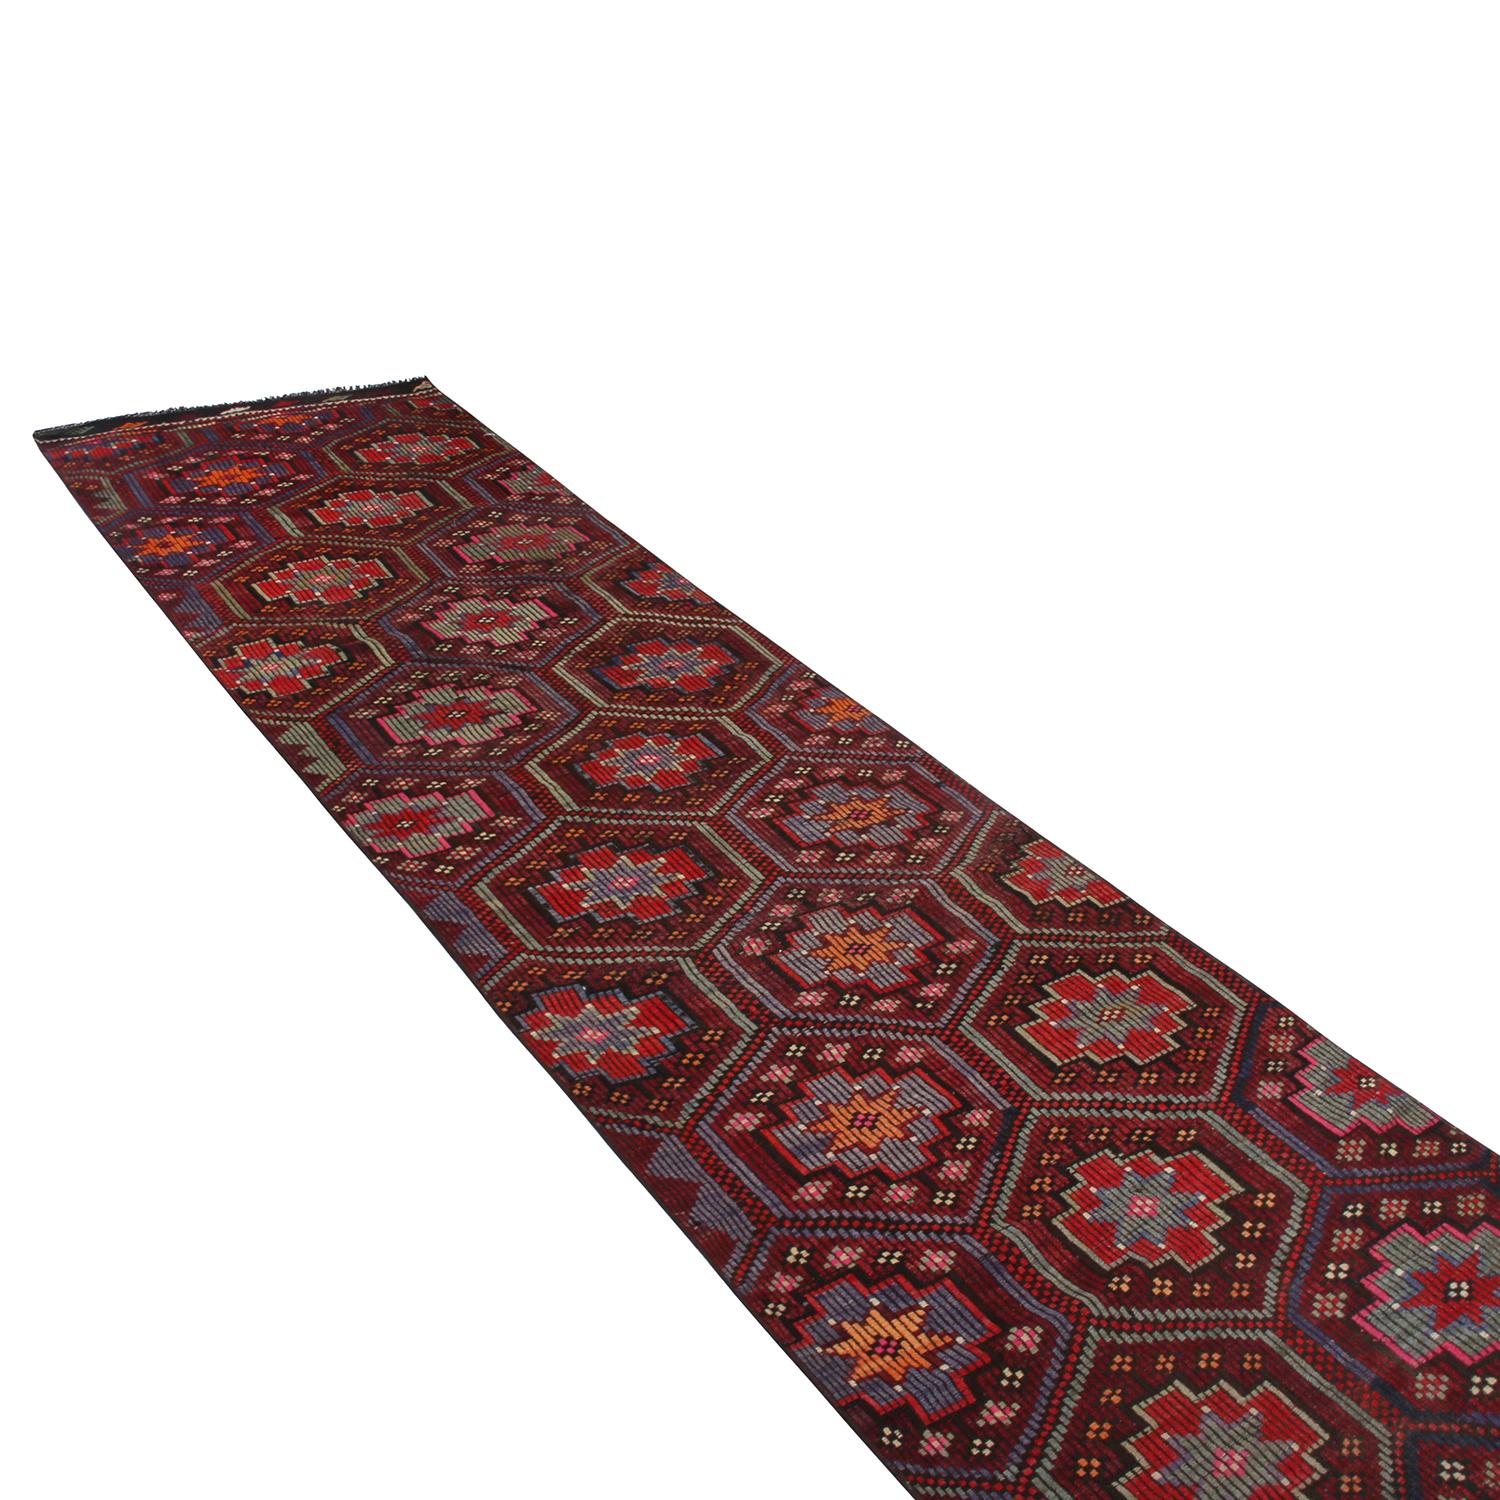 handwoven in Turkey originating between 1950-1960, this vintage mid-century wool Kilim runner enjoys a meticulous play of embroidery and flat weaving, uncommon and distinguishing of a select line from our recent additions to our collections. This